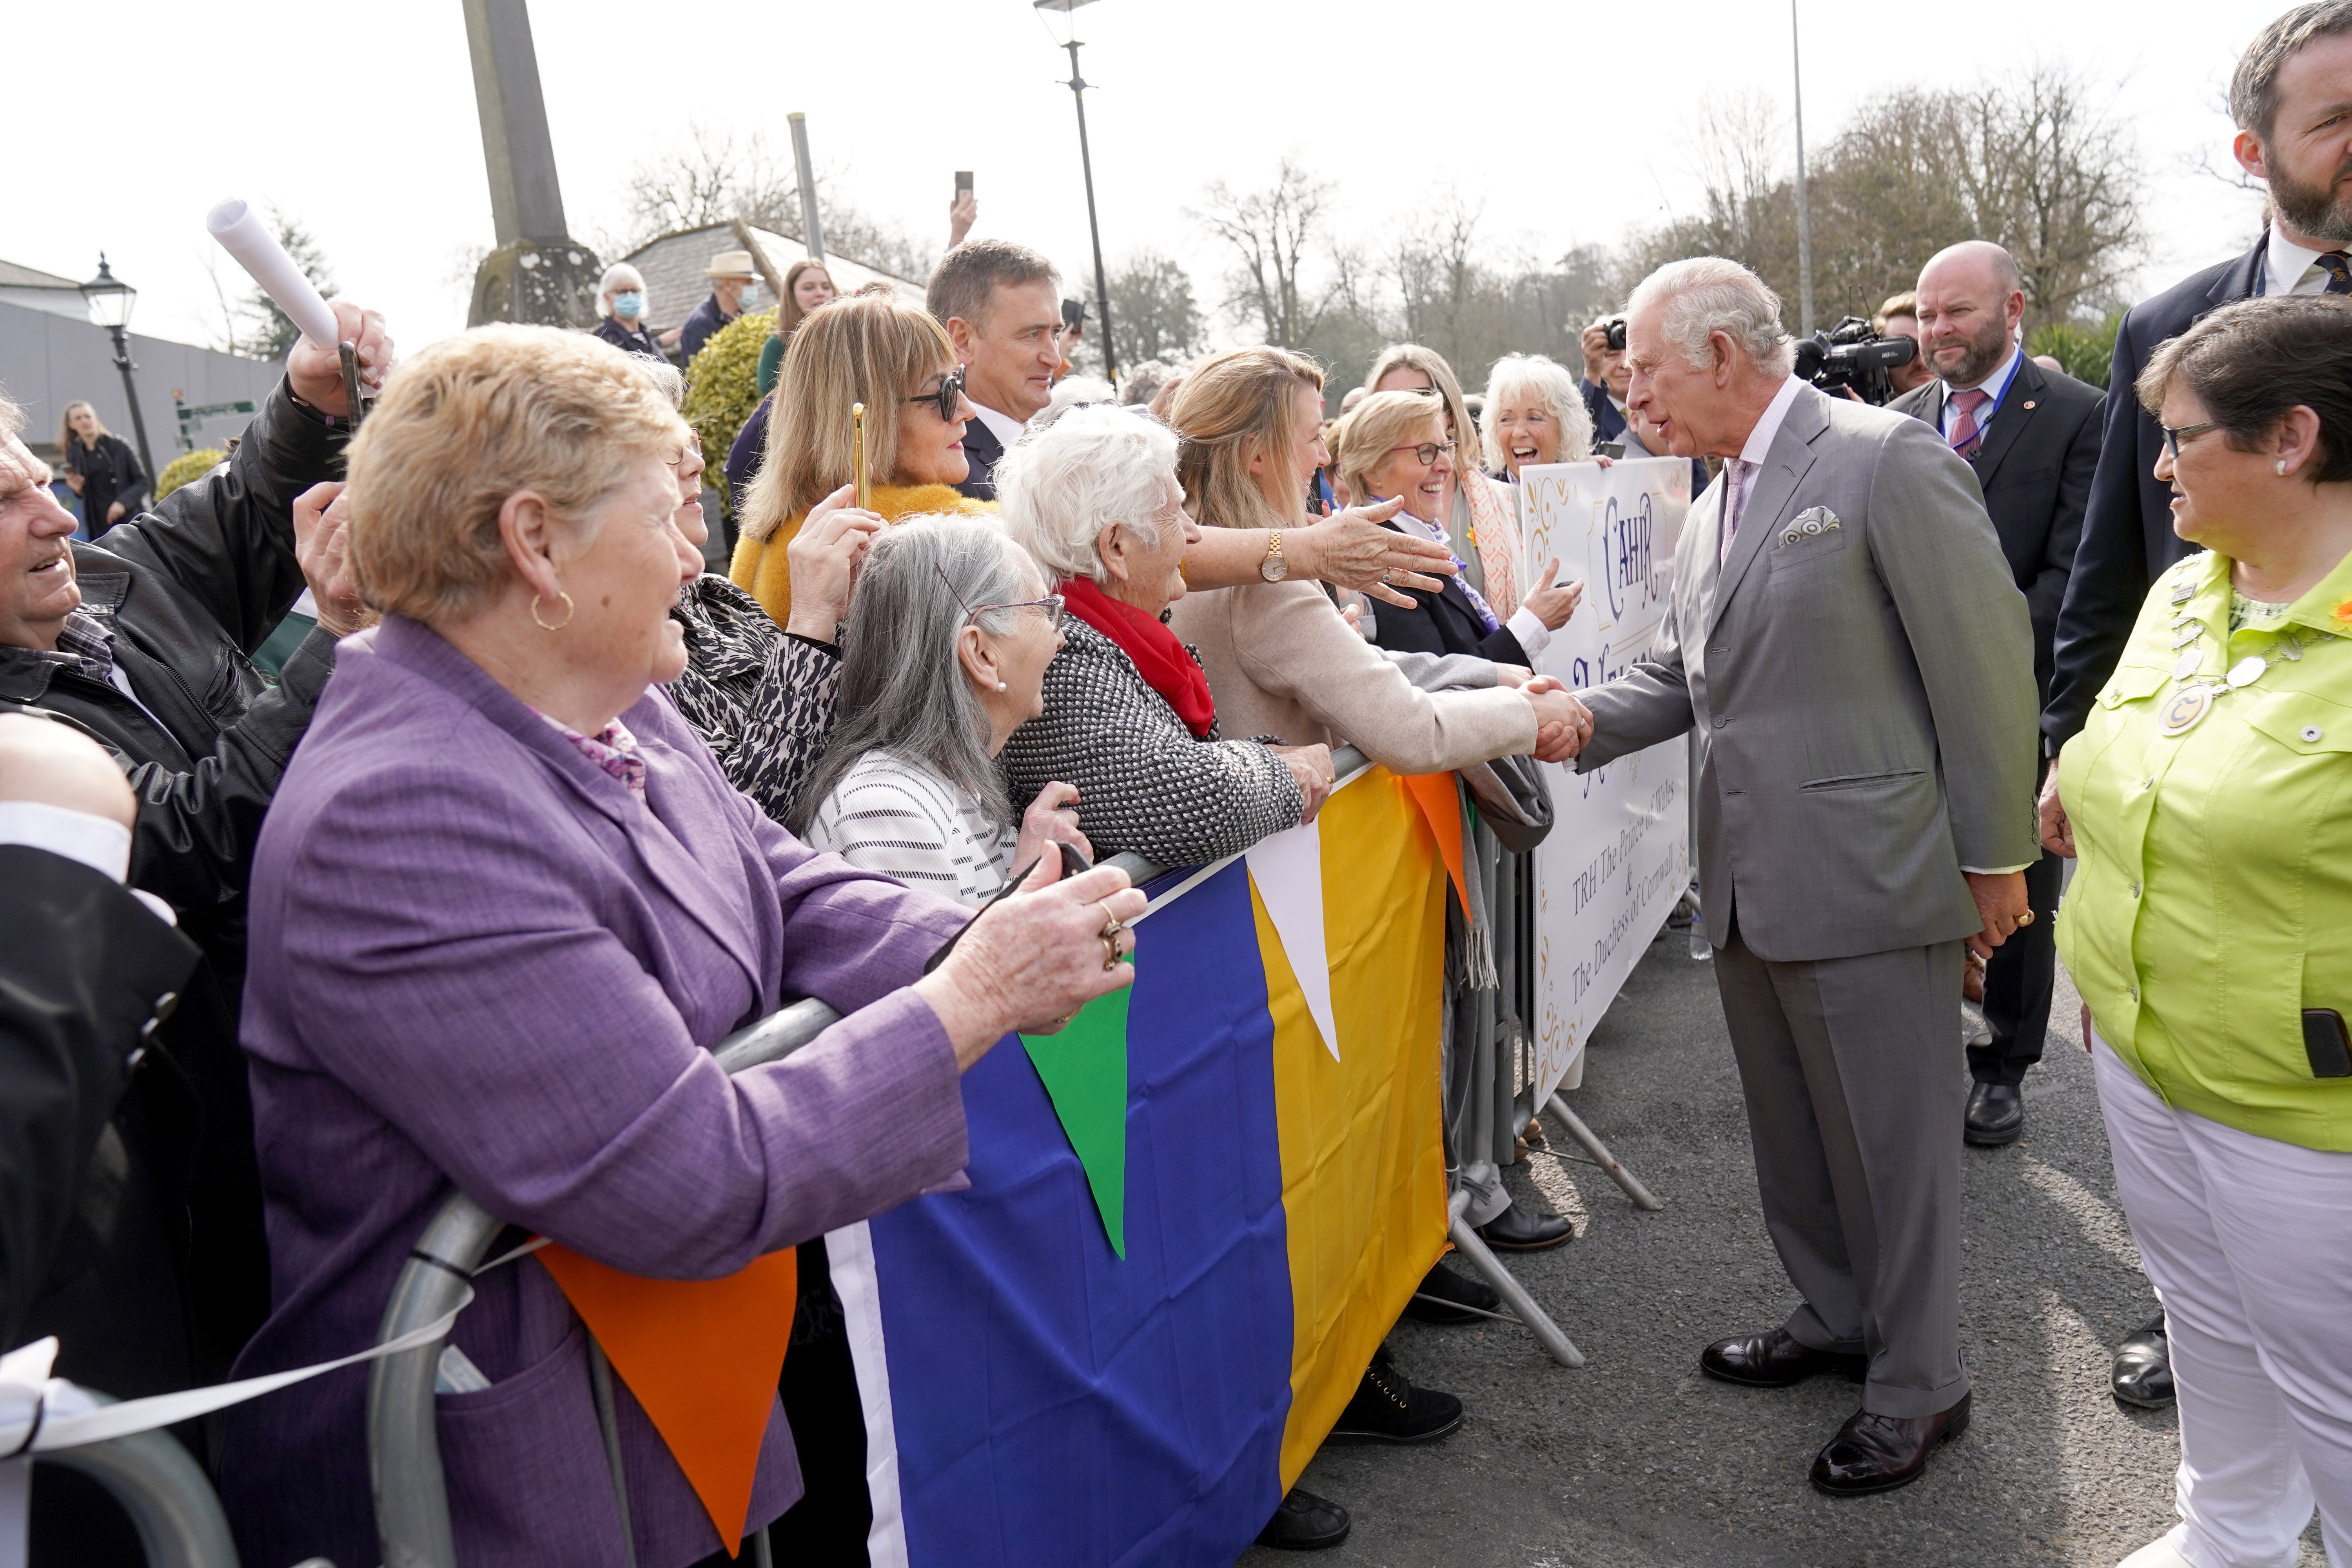 The Prince of Wales meets people during a visit to Cahir Farmers’ Market (Brian Lawless/PA)